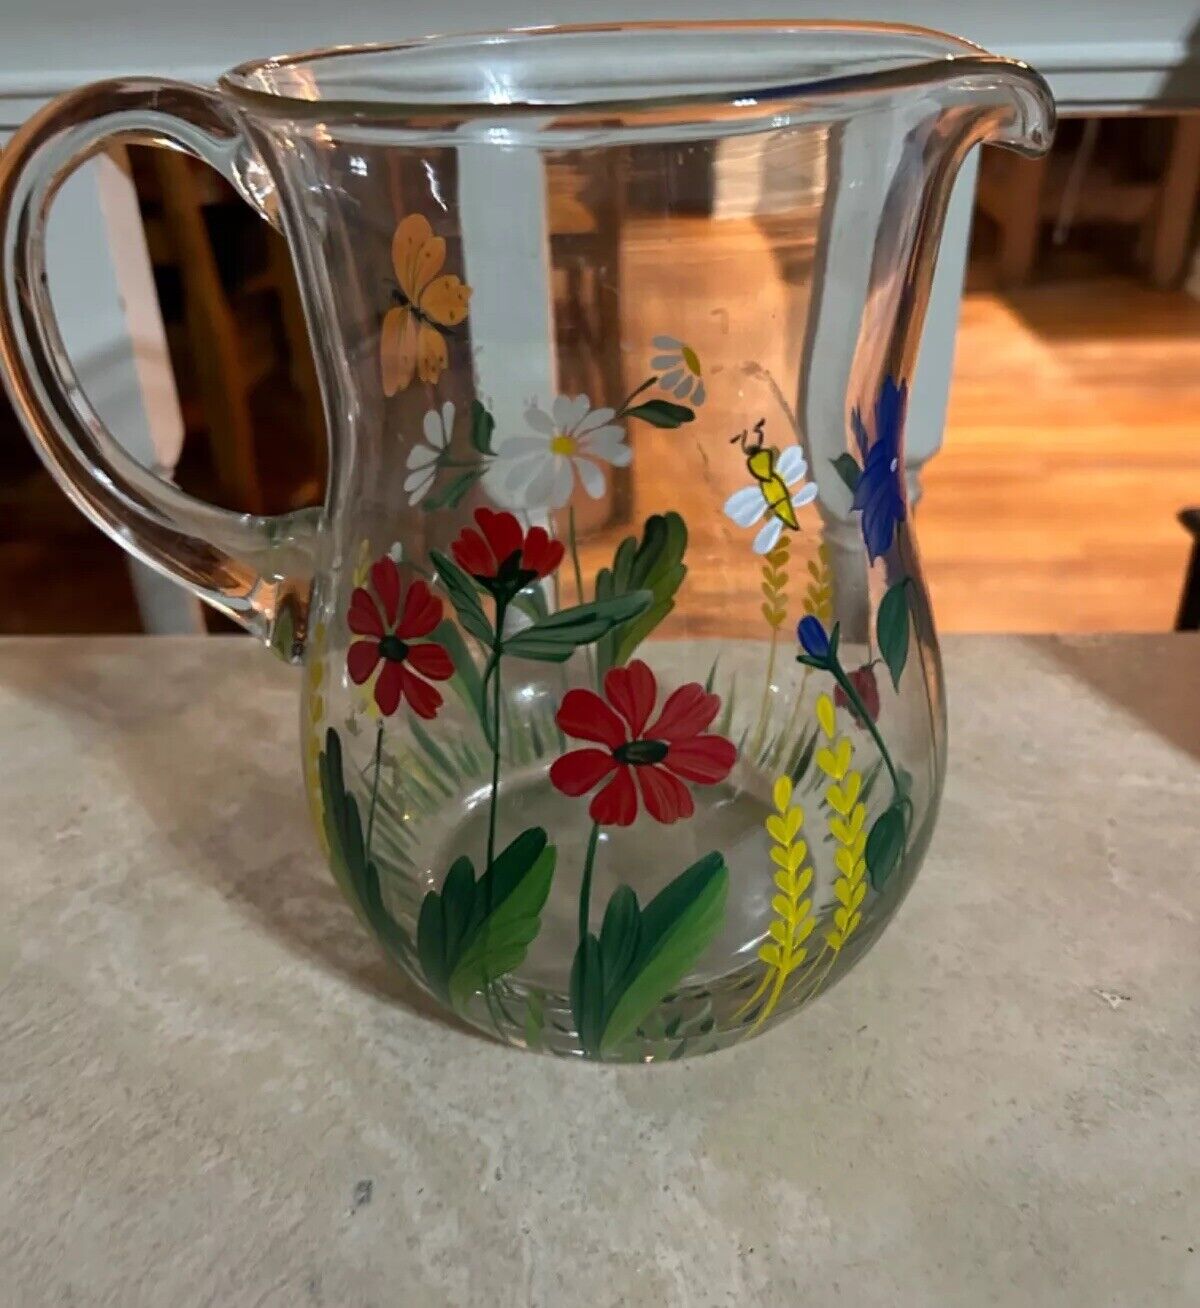 Vintage Hand Painted Glass Pitcher with  Flowers, Butterflies, and a Ladybug  7”